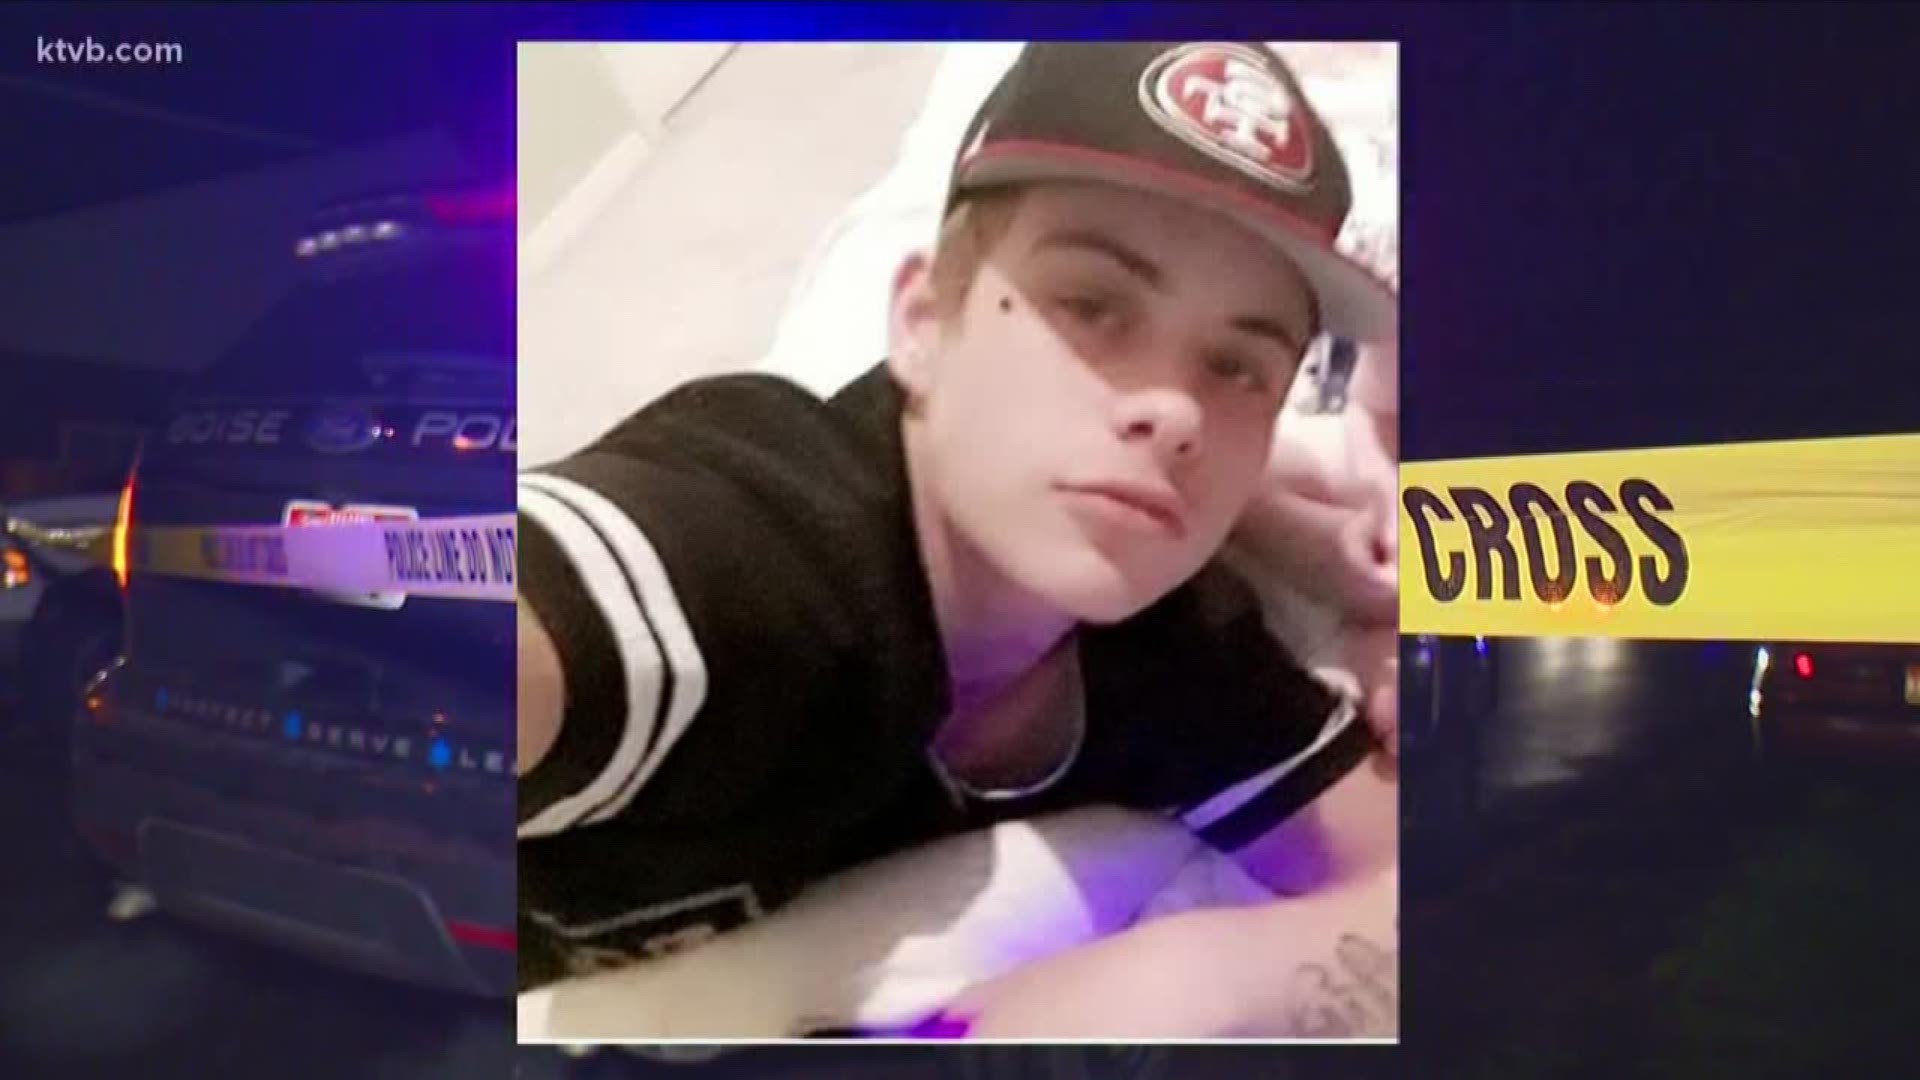 "We don't want any more mothers crying over their children, no more need to happen," George Heidenriech said. His son Sonny was shot in the chest last Sunday in a Boise shooting that also killed a 19-year-old woman.